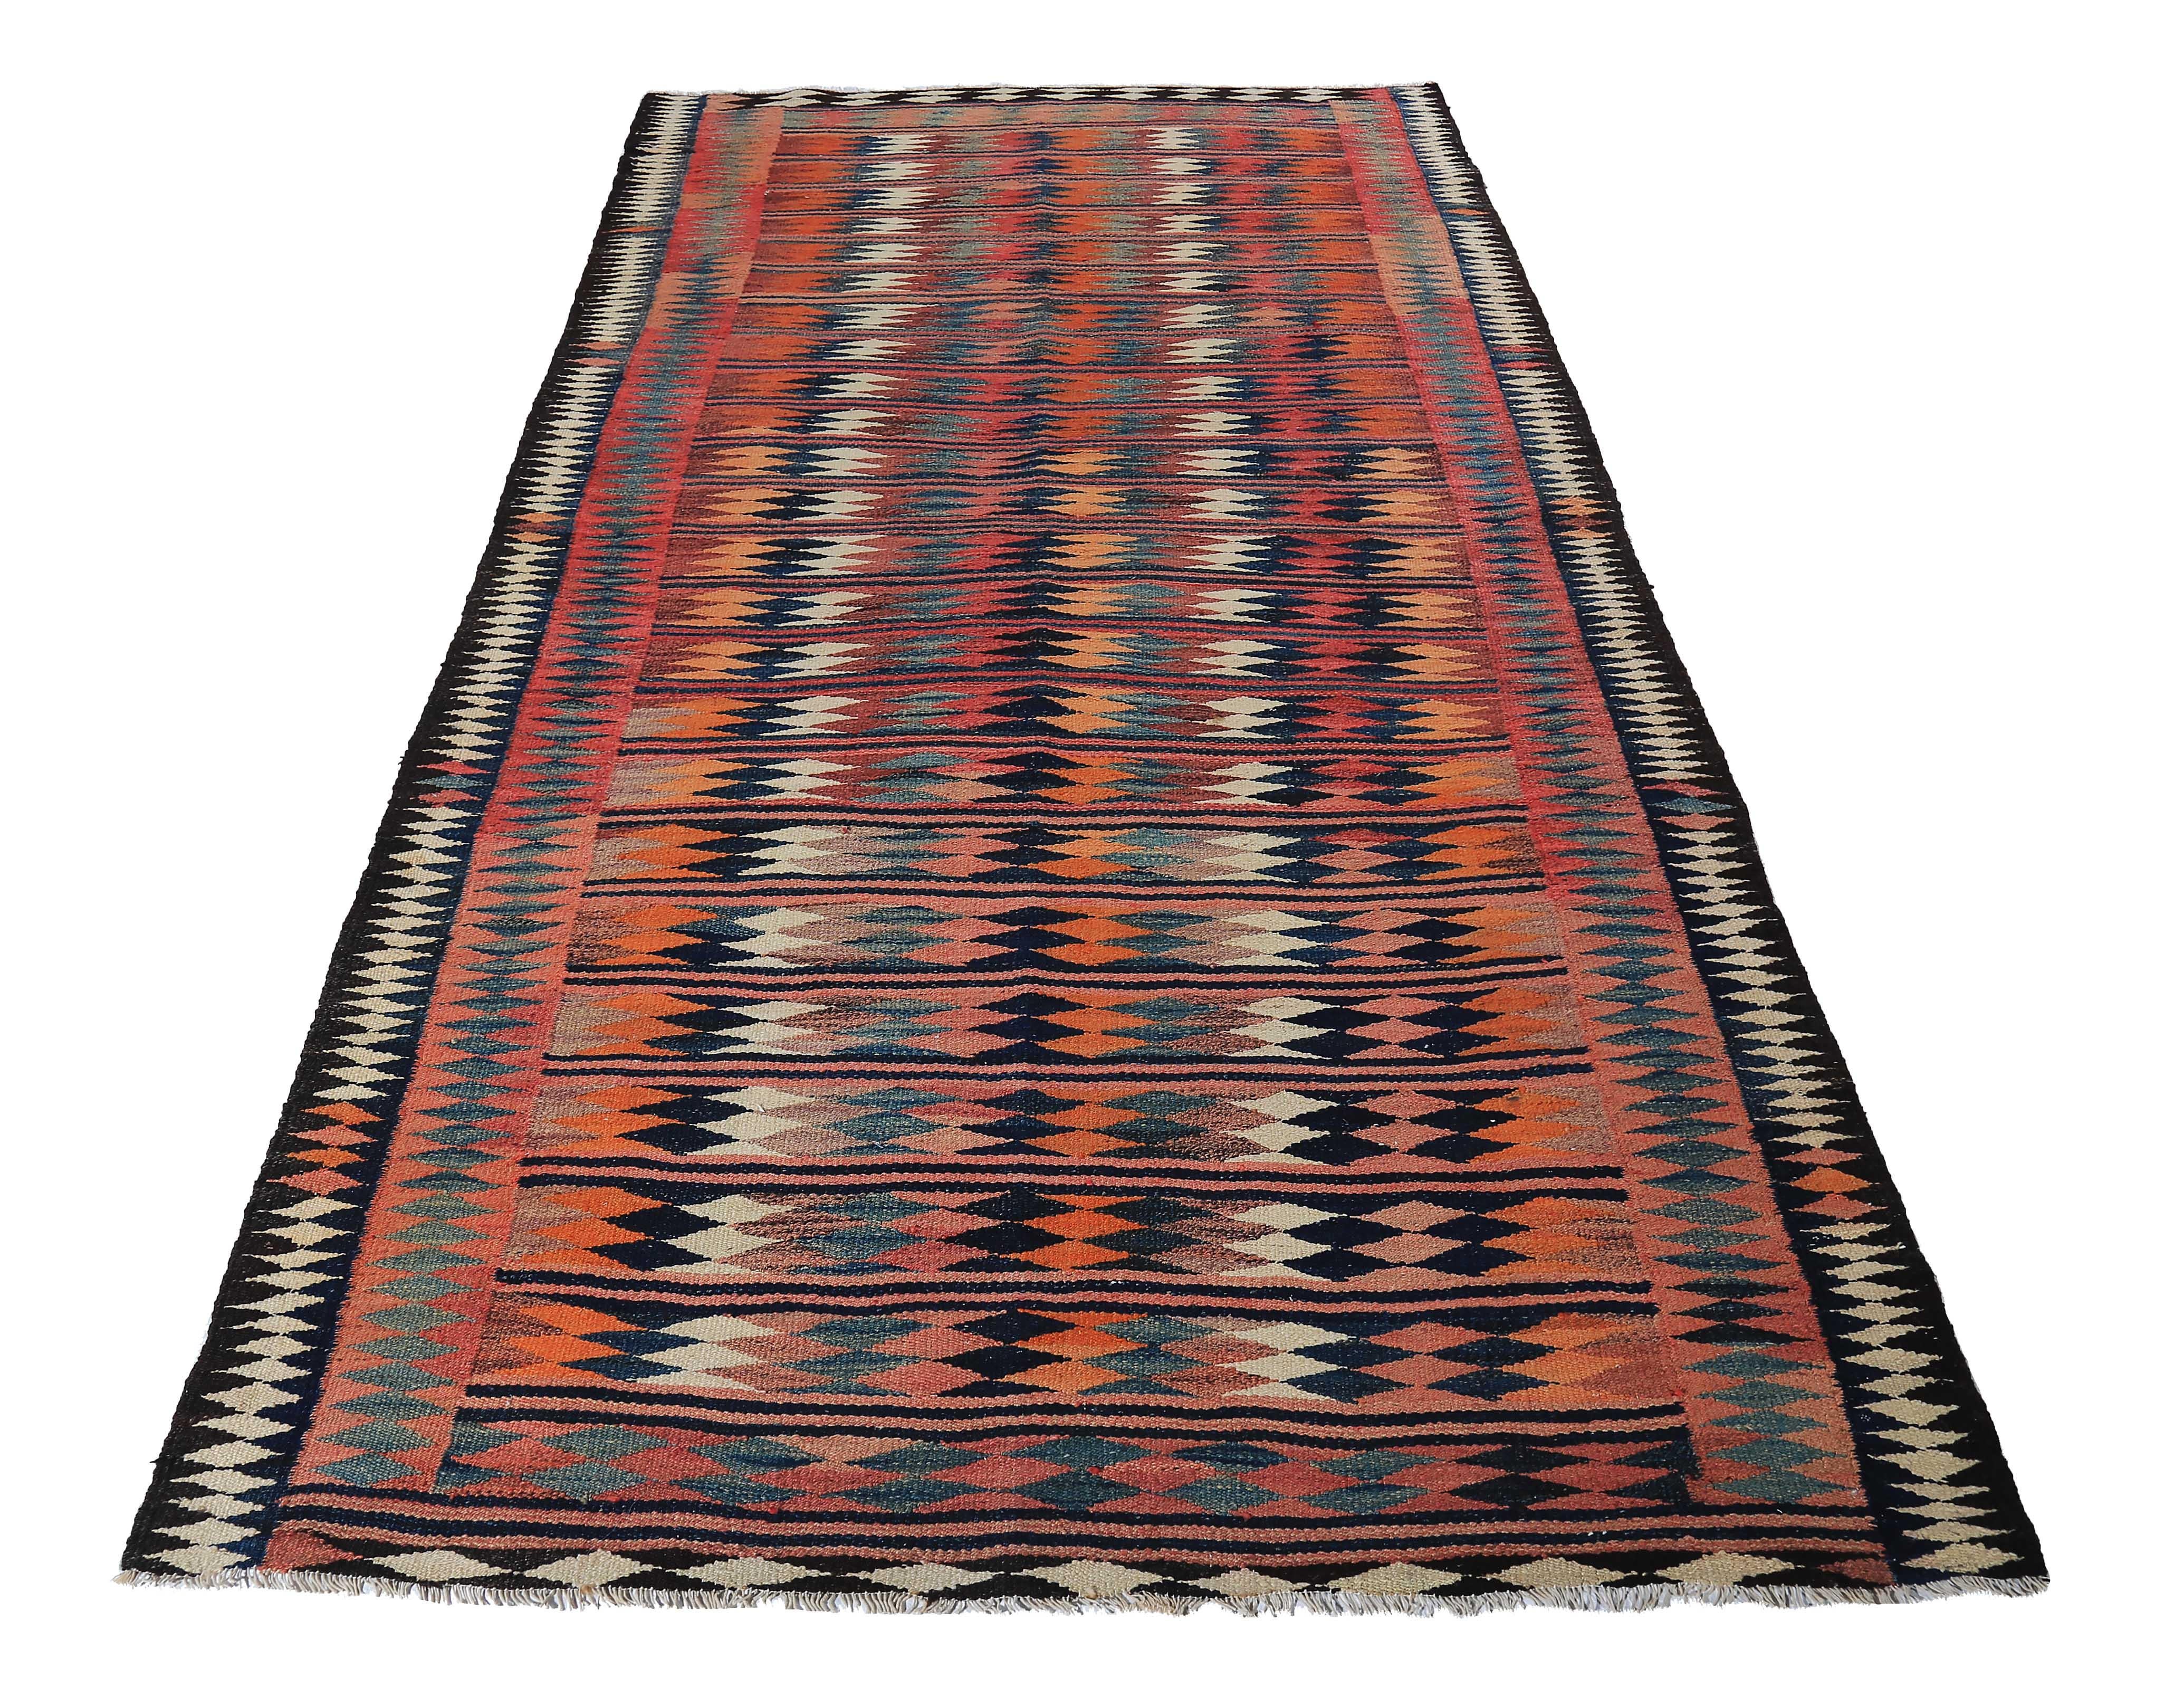 Turkish rug handwoven from the finest sheep’s wool and colored with all-natural vegetable dyes that are safe for humans and pets. It’s a traditional Kilim flat-weave design featuring colorful geometric details on a rich black field. It’s a stunning